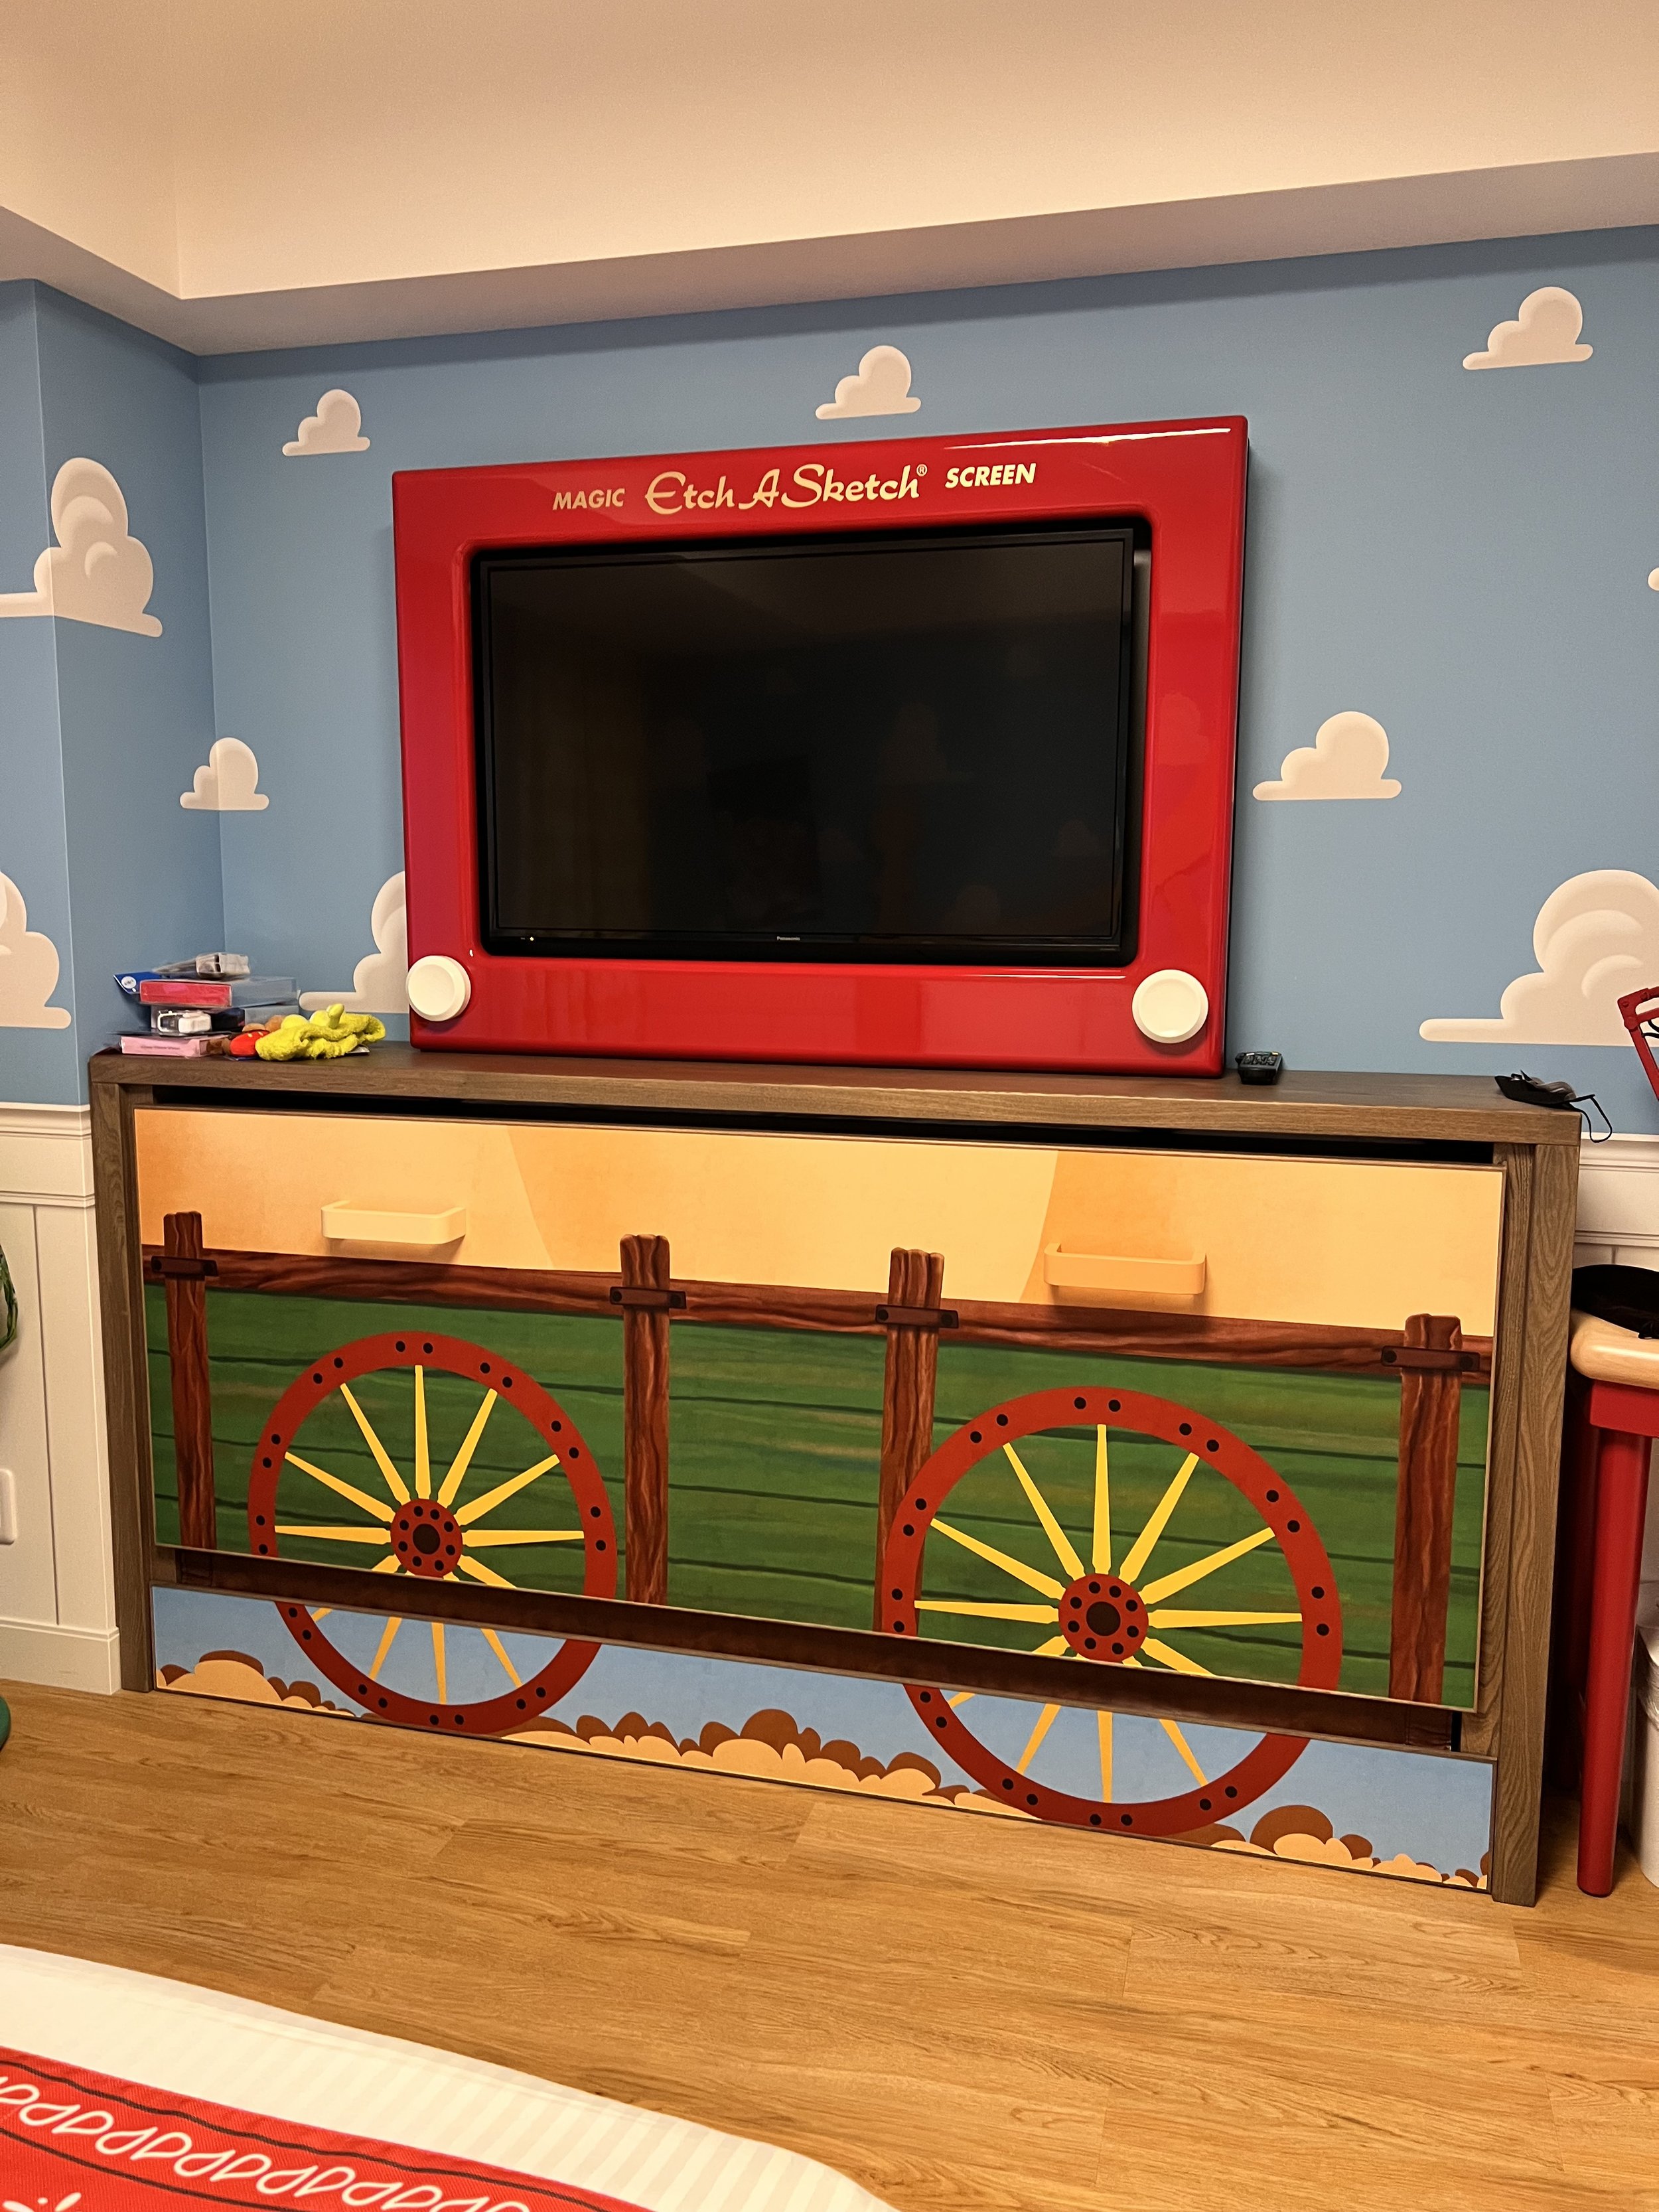  TV that looks like an etch-a-sketch on top of a brown cabinet that looks like a wagon 